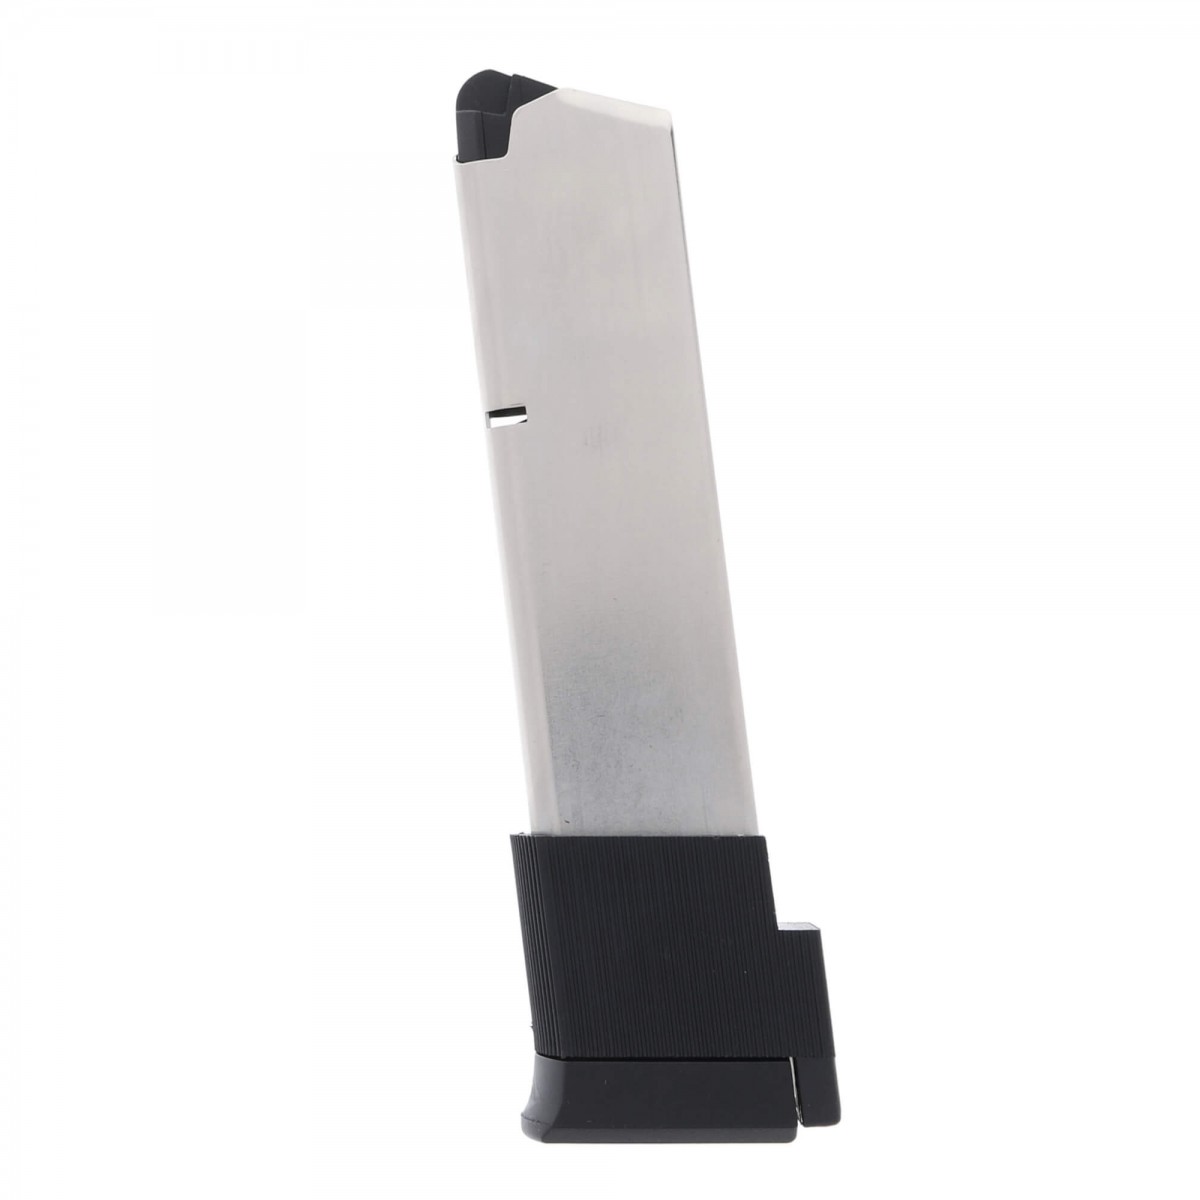 RUG 04 ProMag for Ruger P90/P97 .45 ACP 10 Round Blue Steel Magazine 